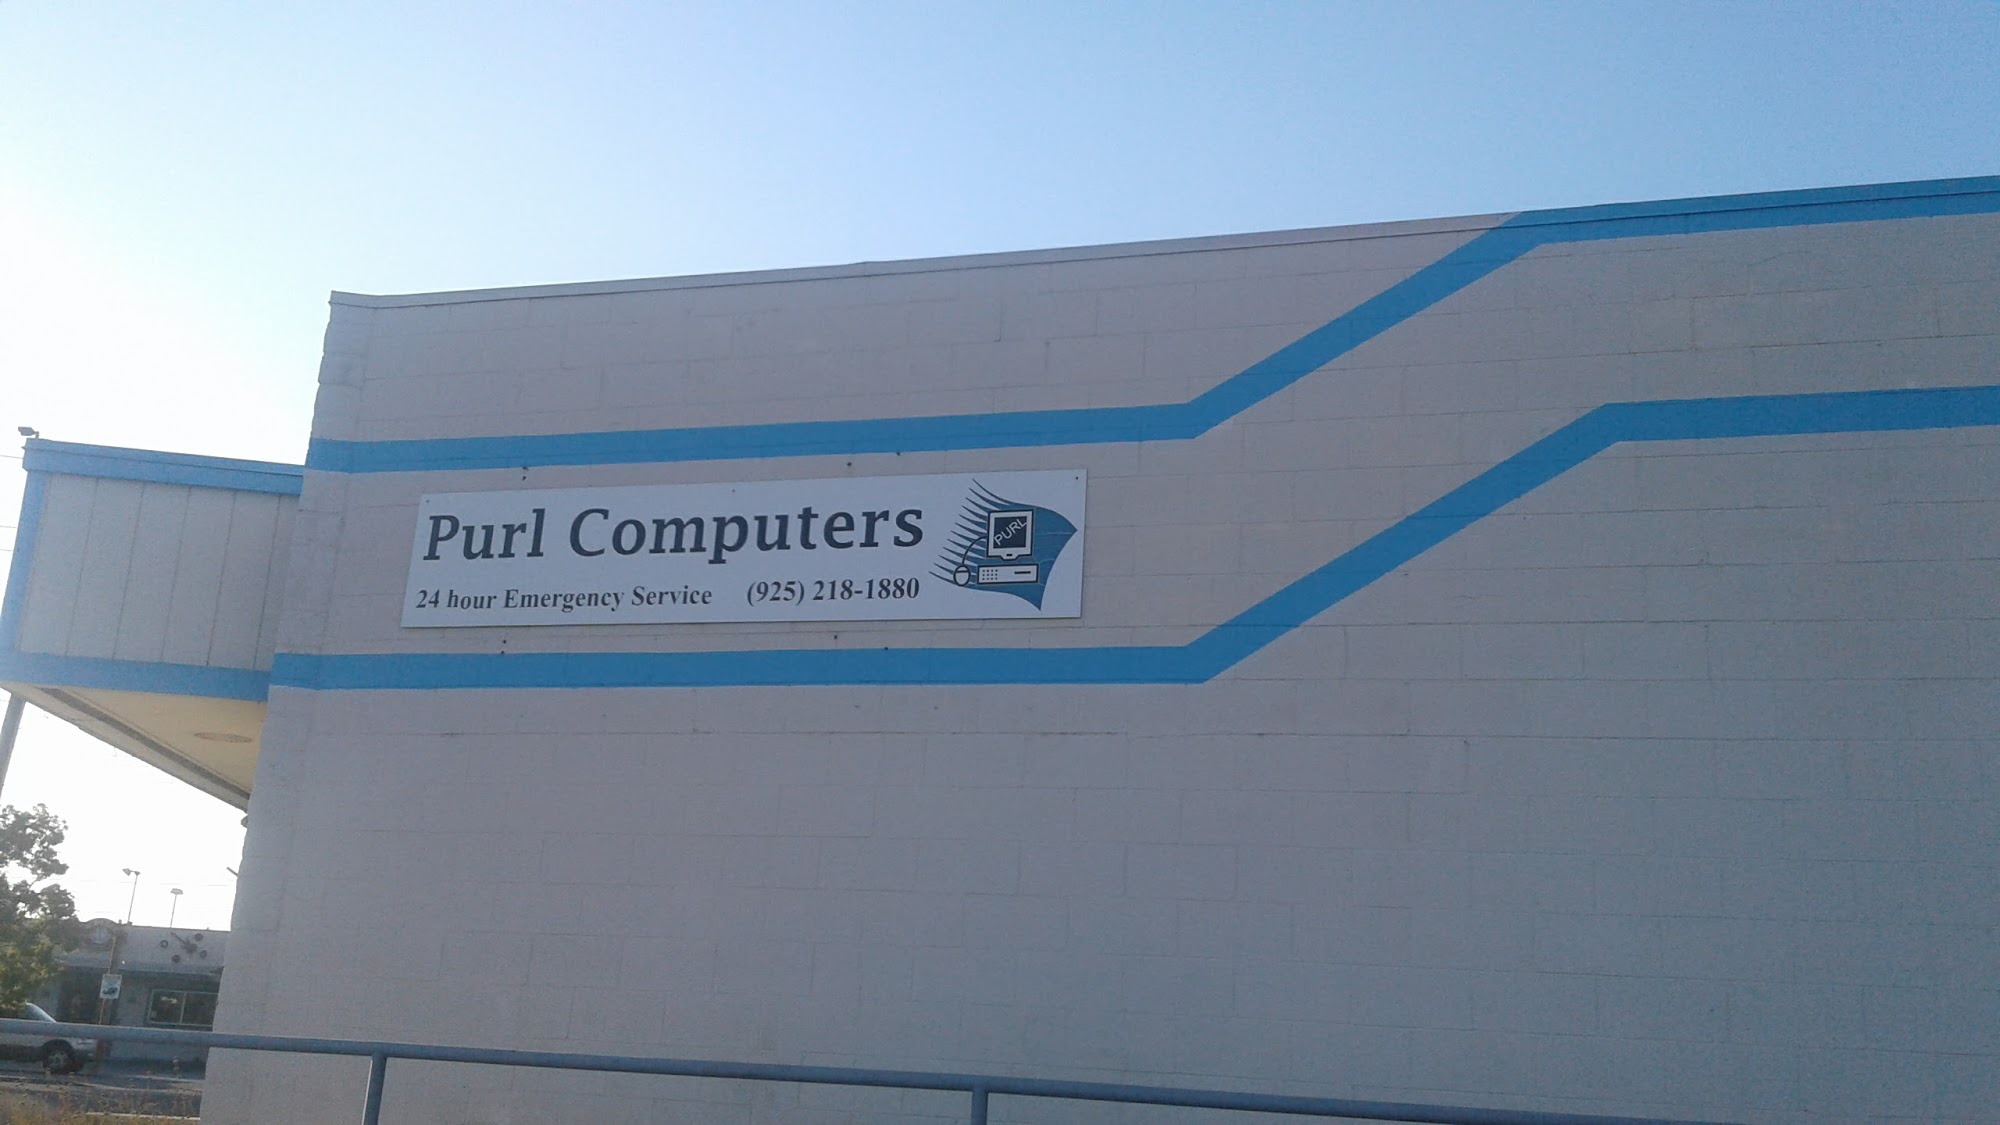 Purl Computers